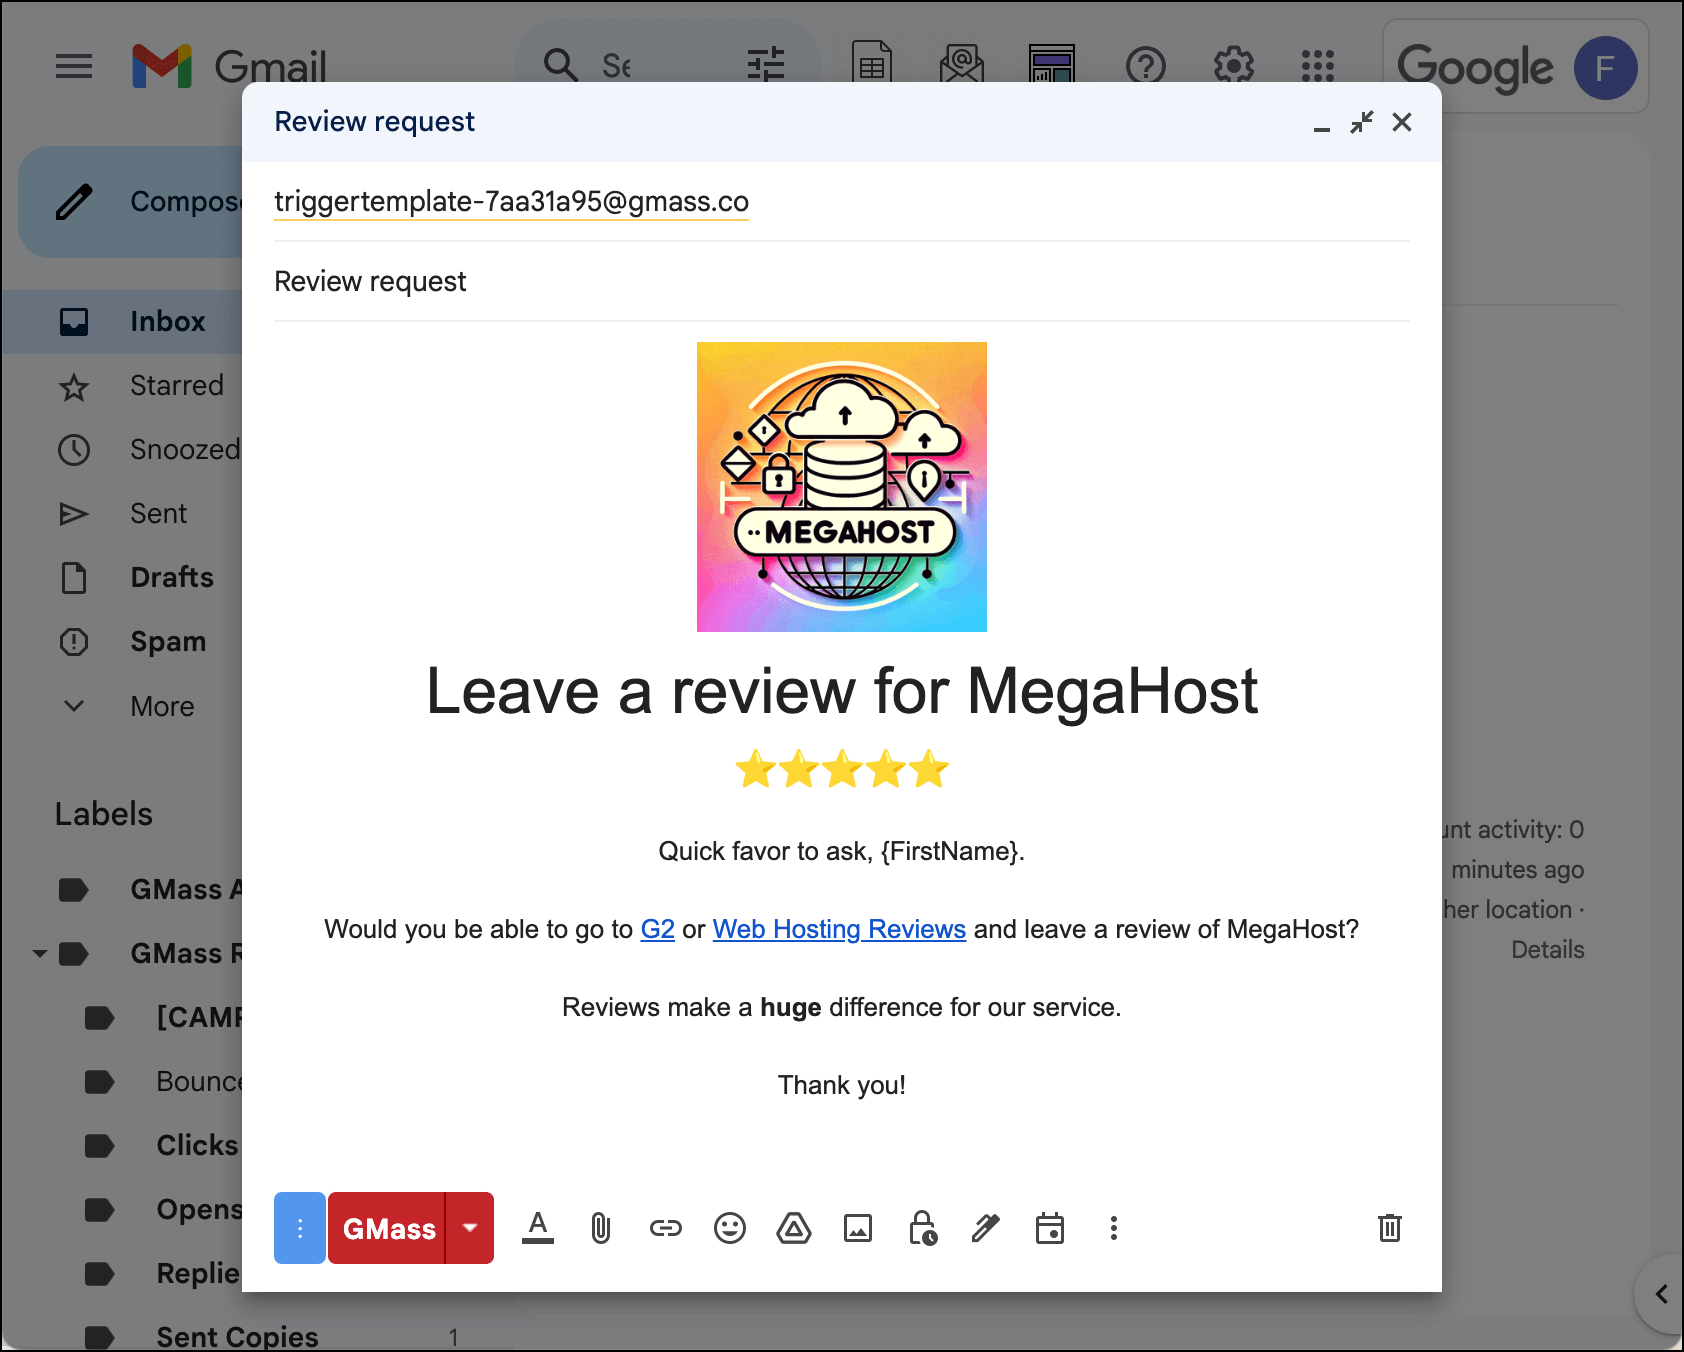 A review request triggered email